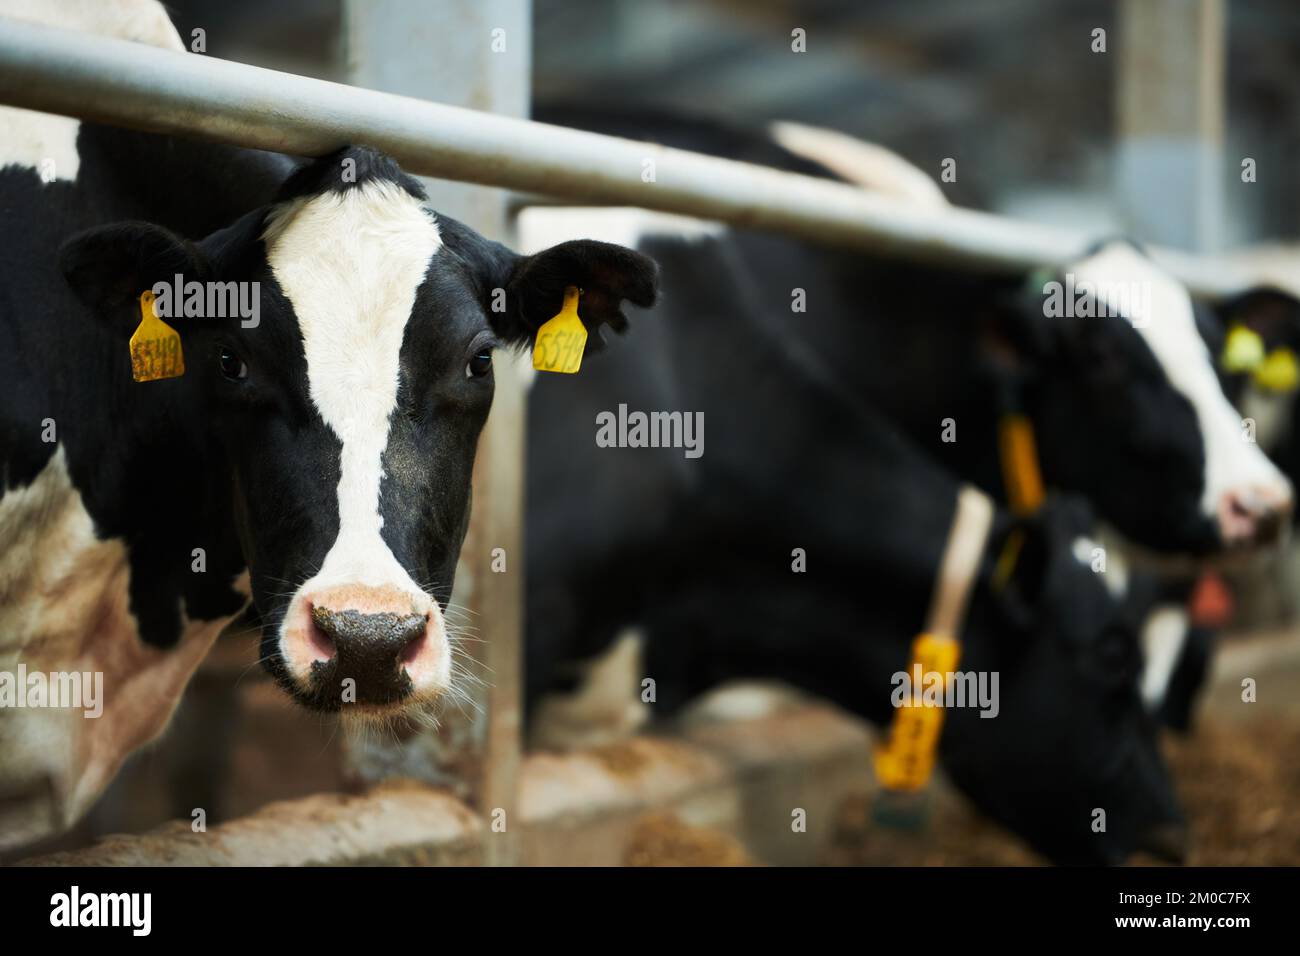 Black-and-white purebred milk cow looking at camera while standing in cowshed against other livestock eating food from feeder Stock Photo